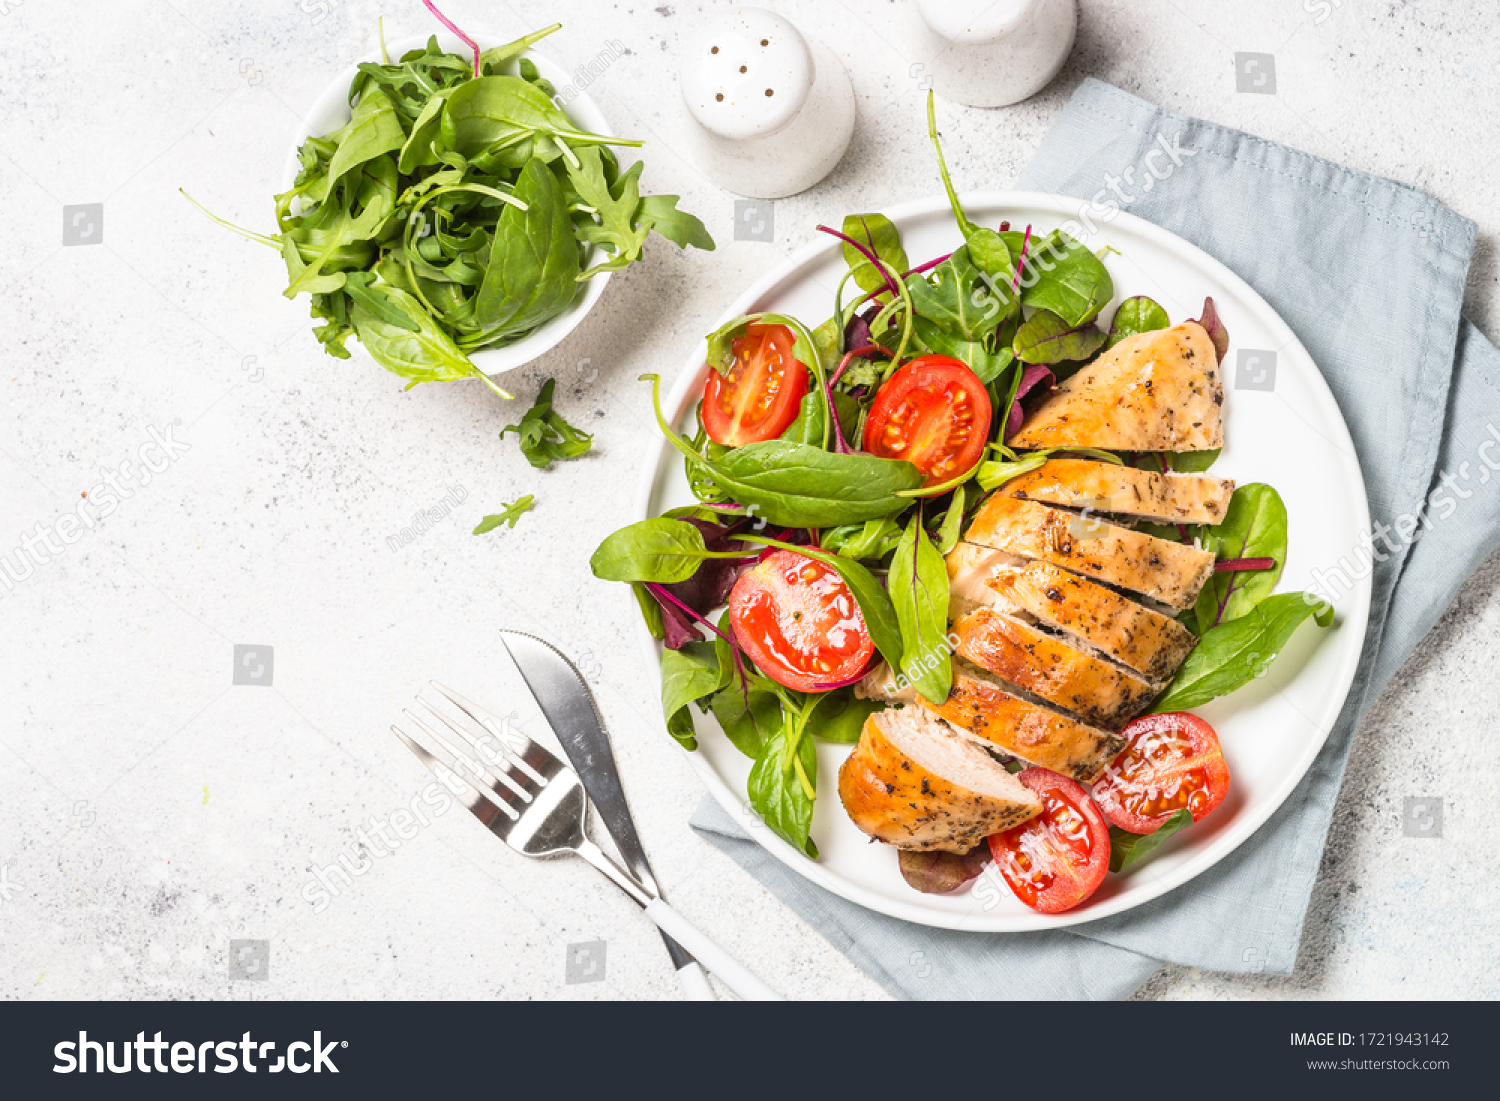 Chicken fillet with salad. Healthy food, keto diet, diet lunch concept. Top view on white background. #1721943142